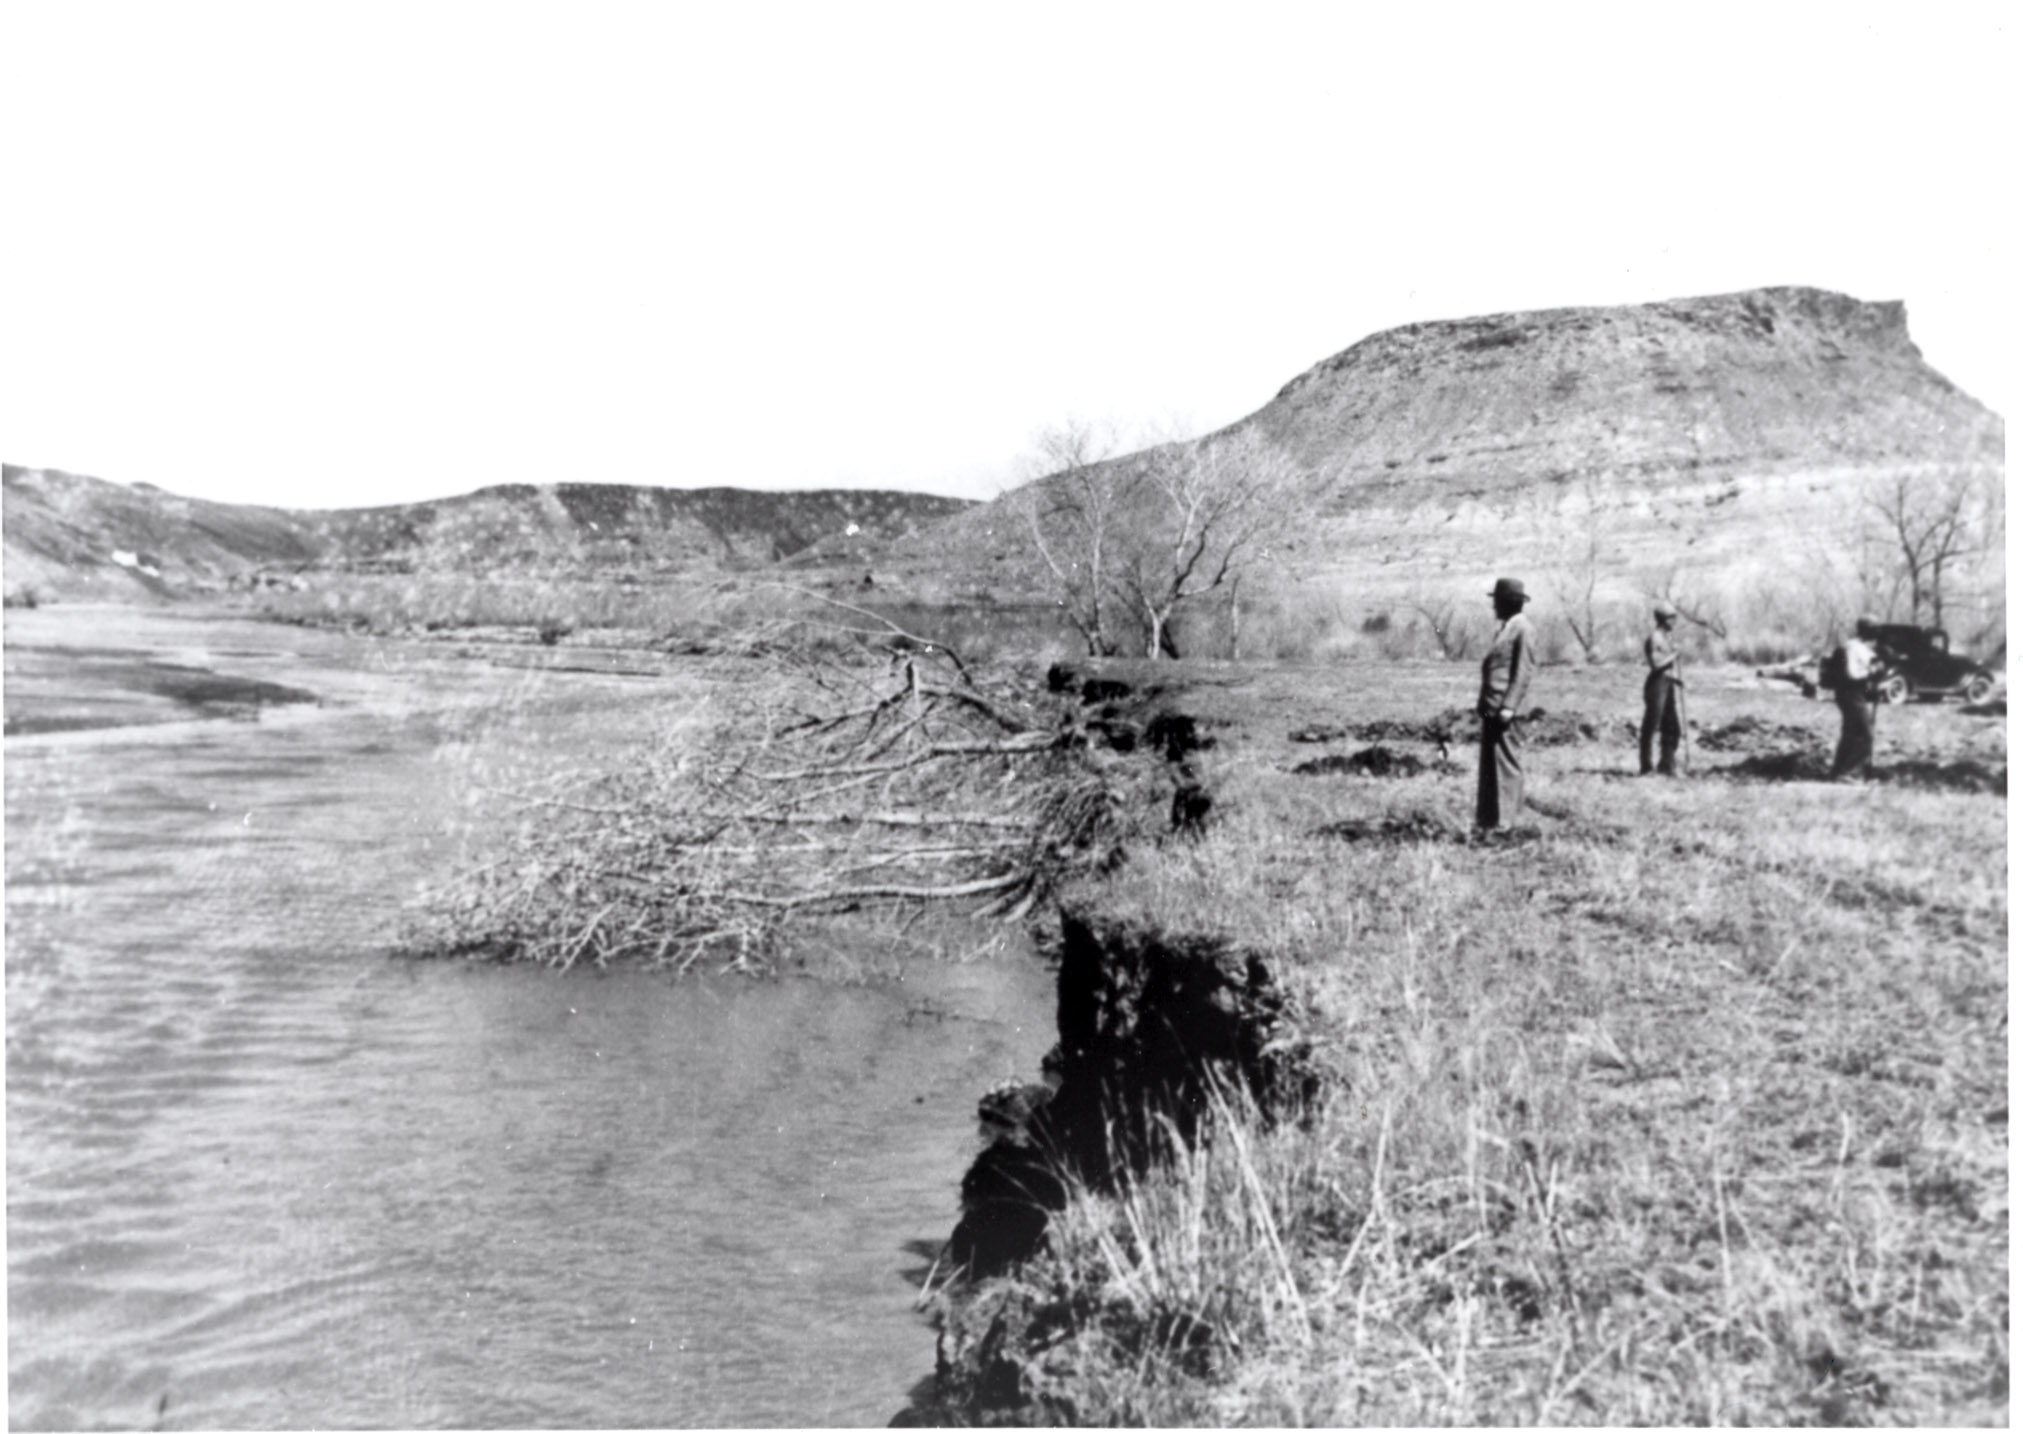 Some men on the eroding Virgen River bank with Shinob Kibe in the background